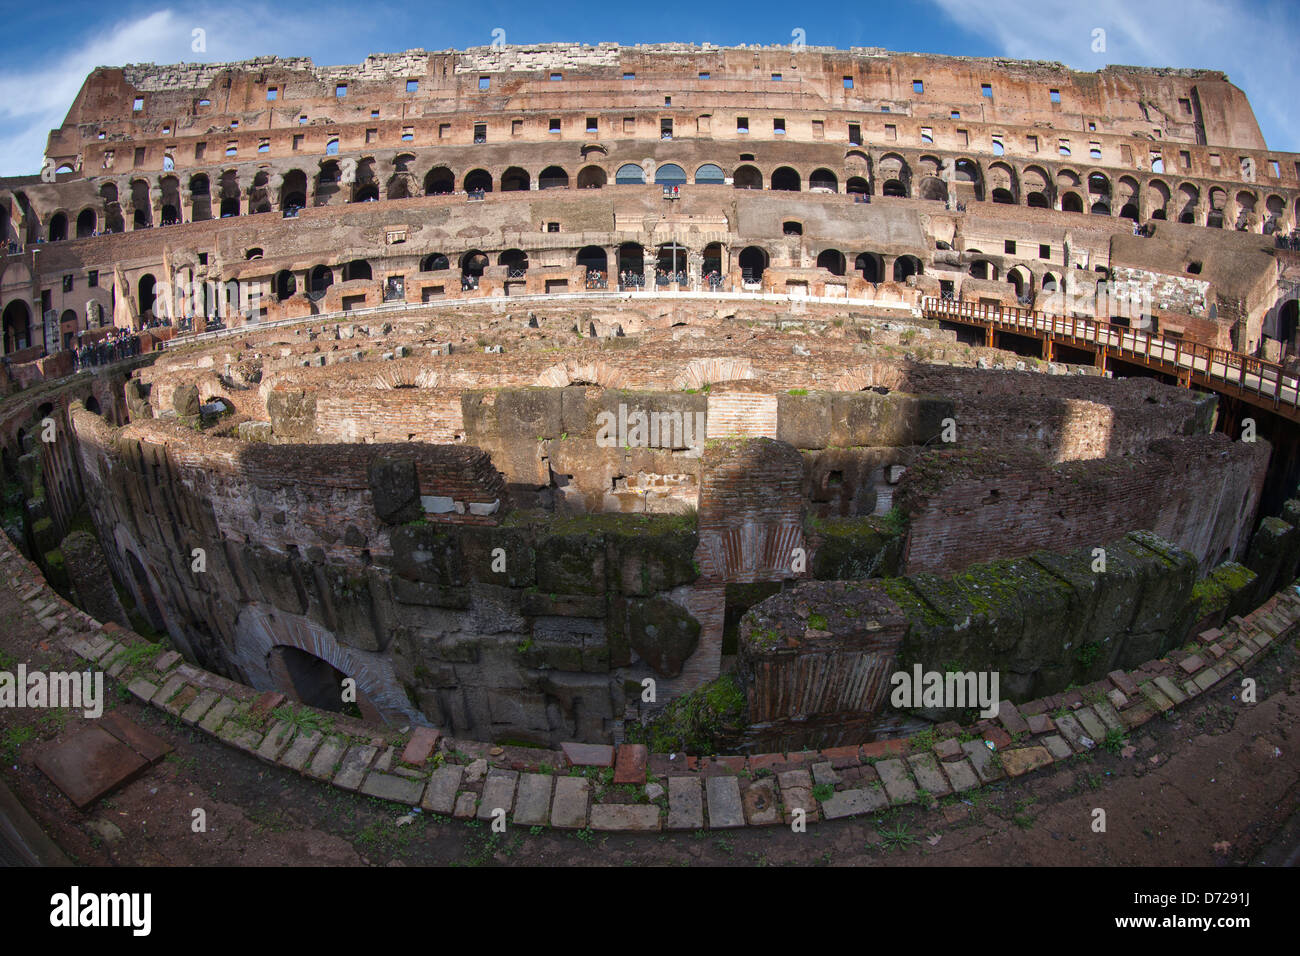 The Colosseum or Coliseum, also known as the Flavian Amphitheatre Stock Photo